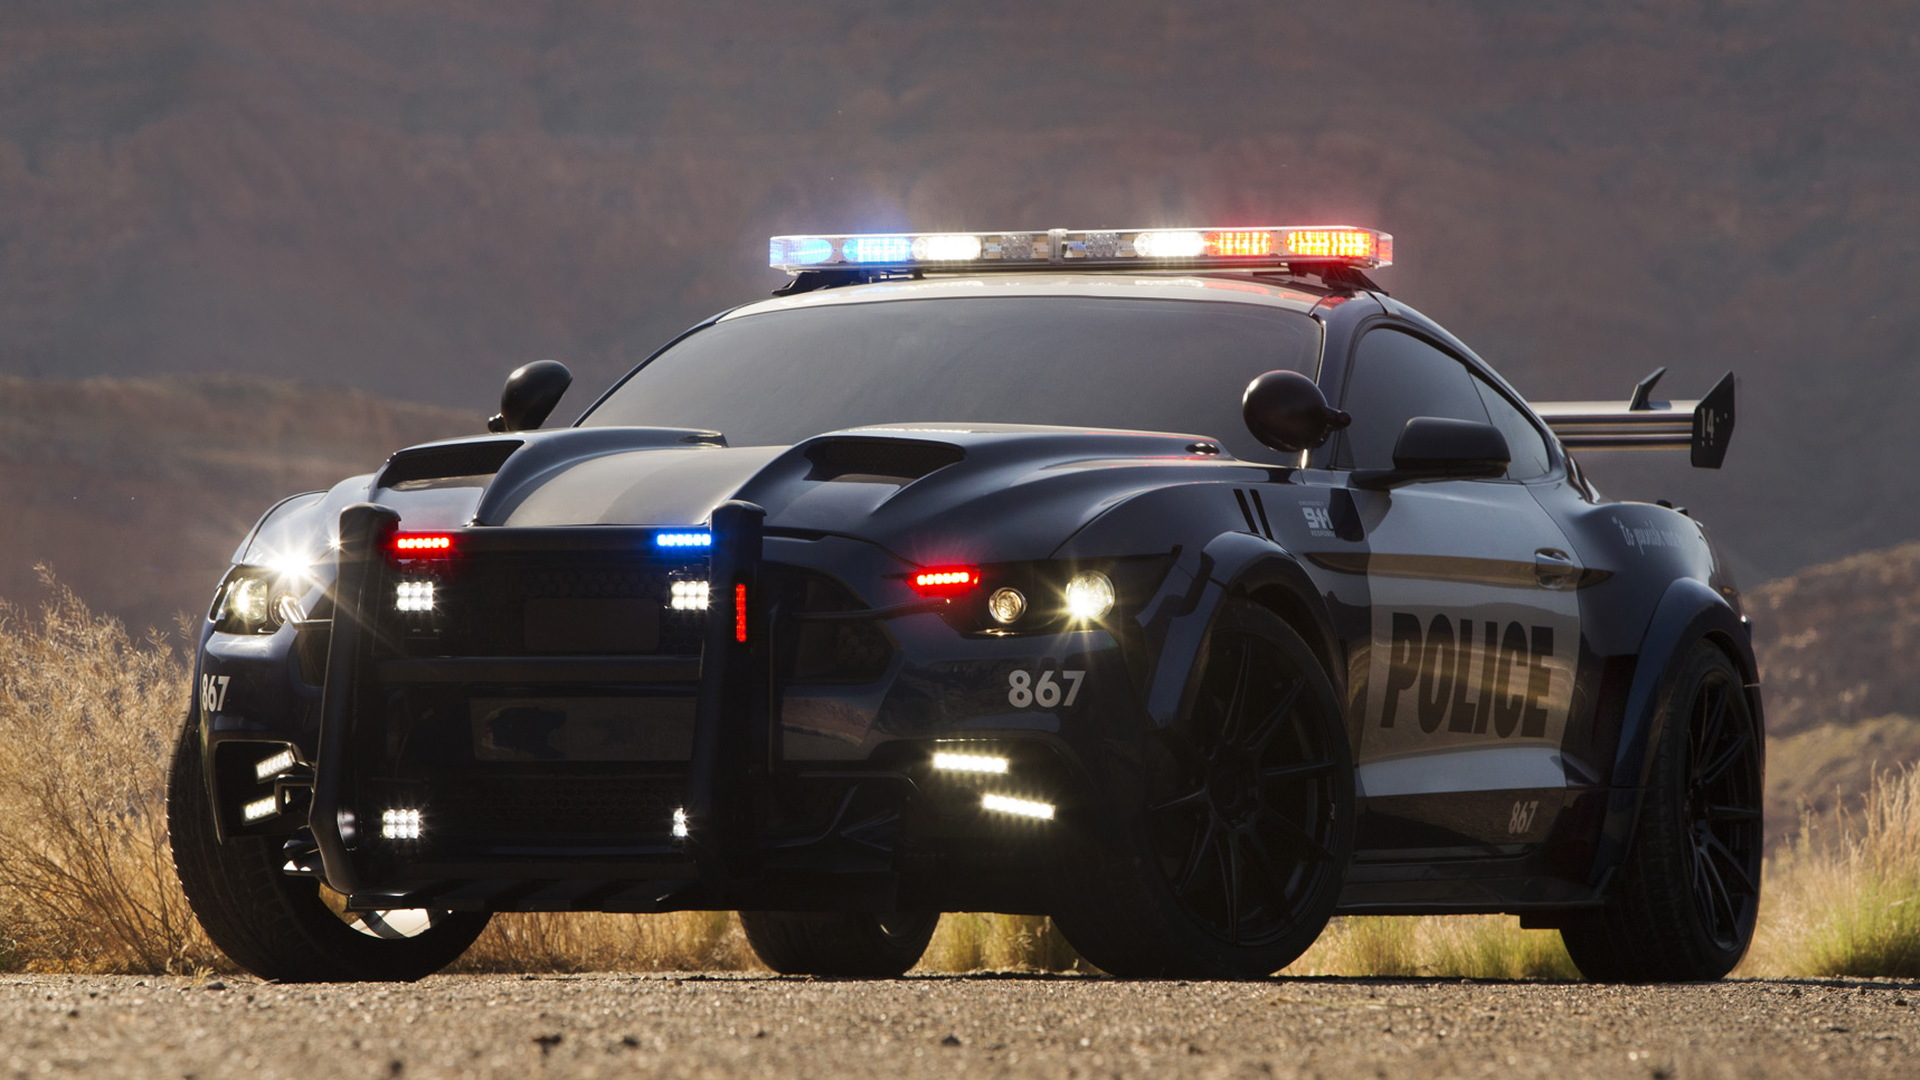 Barricade Ford Mustang police car from 'Transformers: The Last Knight'